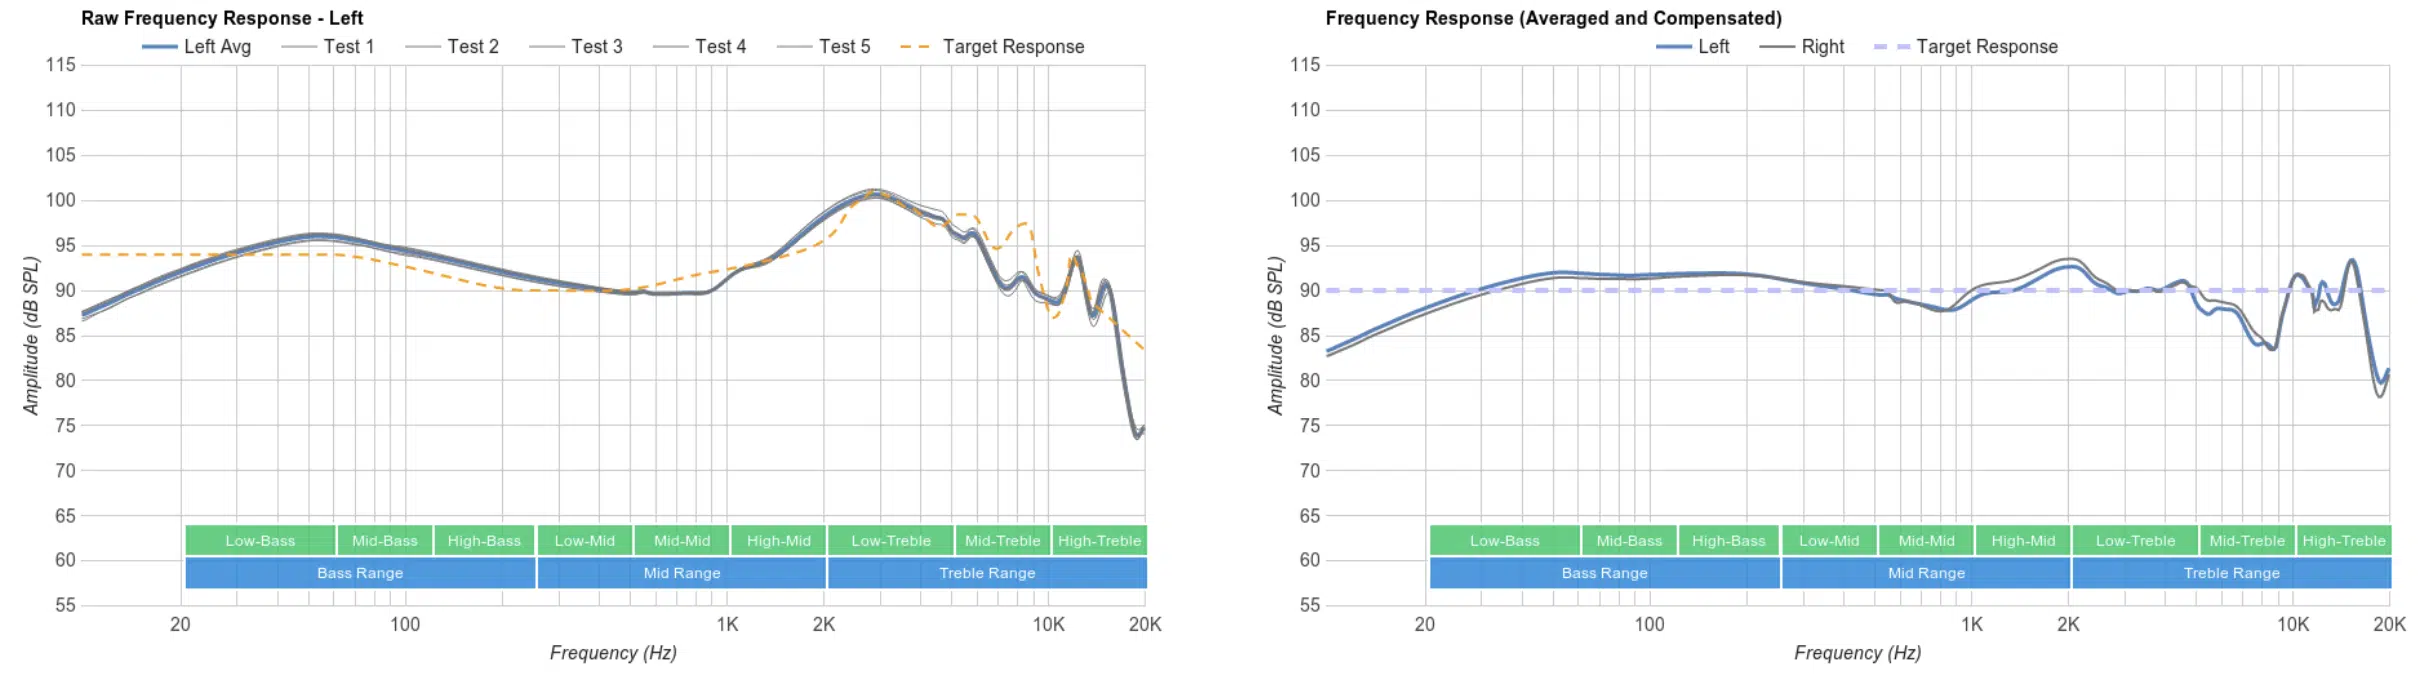 Frequency Response 2 1 - Unison